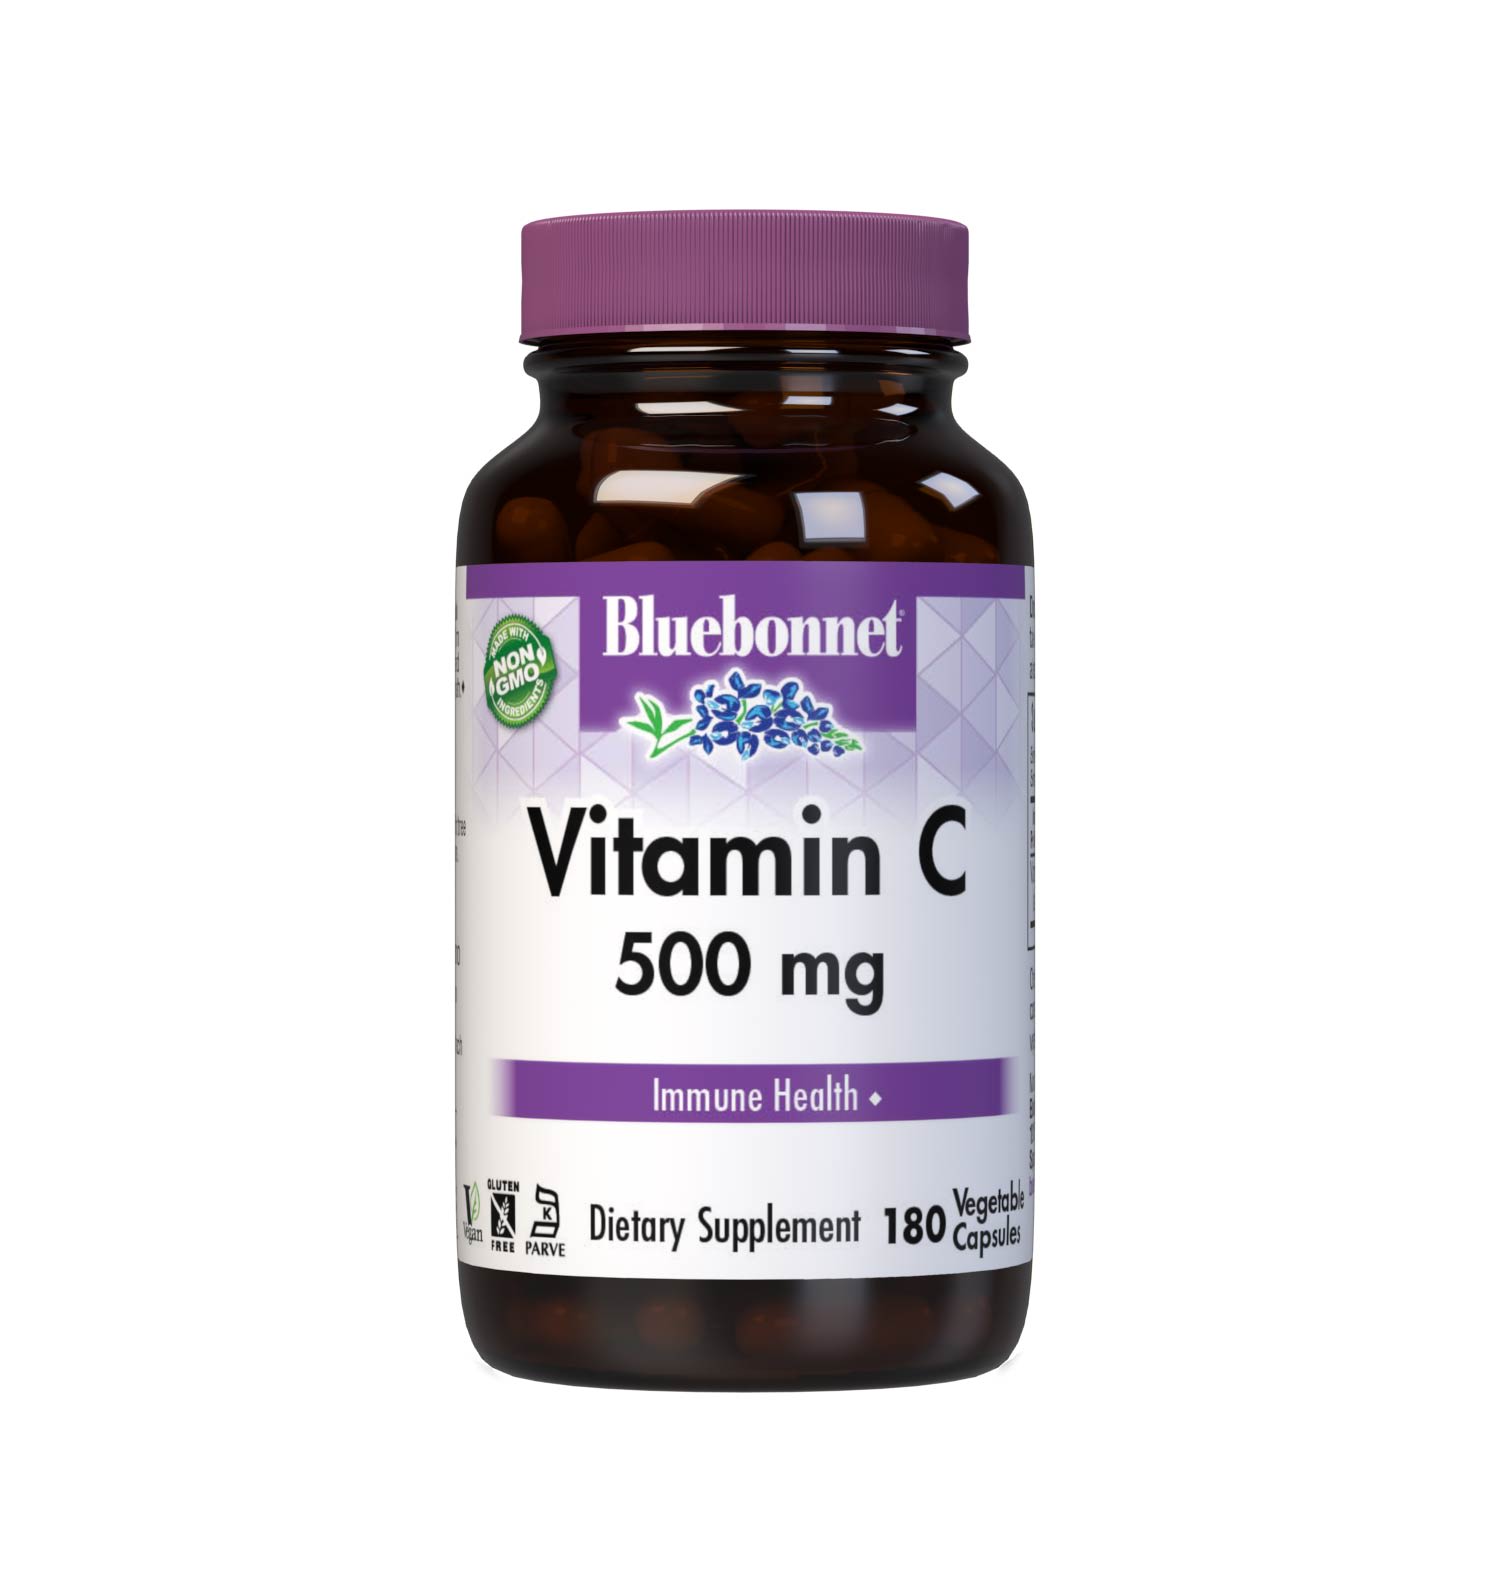 Bluebonnet’s Vitamin C-500 mg 180 Vegetable Capsules are formulated with vitamin C from L-ascorbic acid that is (IP) identity-preserved and non-GMO to help support immune health. #size_180 count